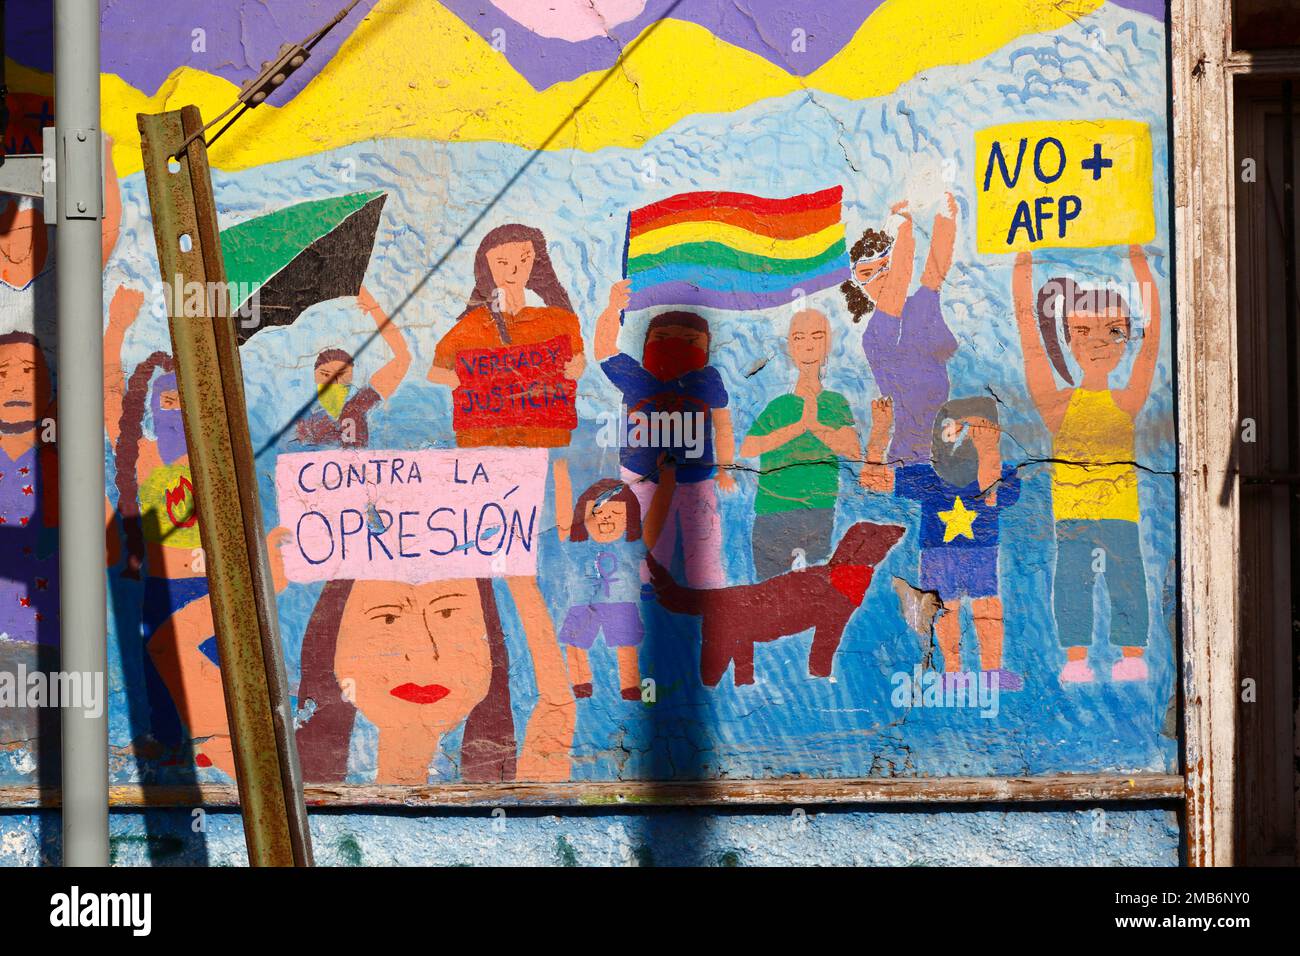 Mural on wall of school protesting against violence against women, oppression and pension plans (AFPs), Copiapo, Region III, Chile Stock Photo